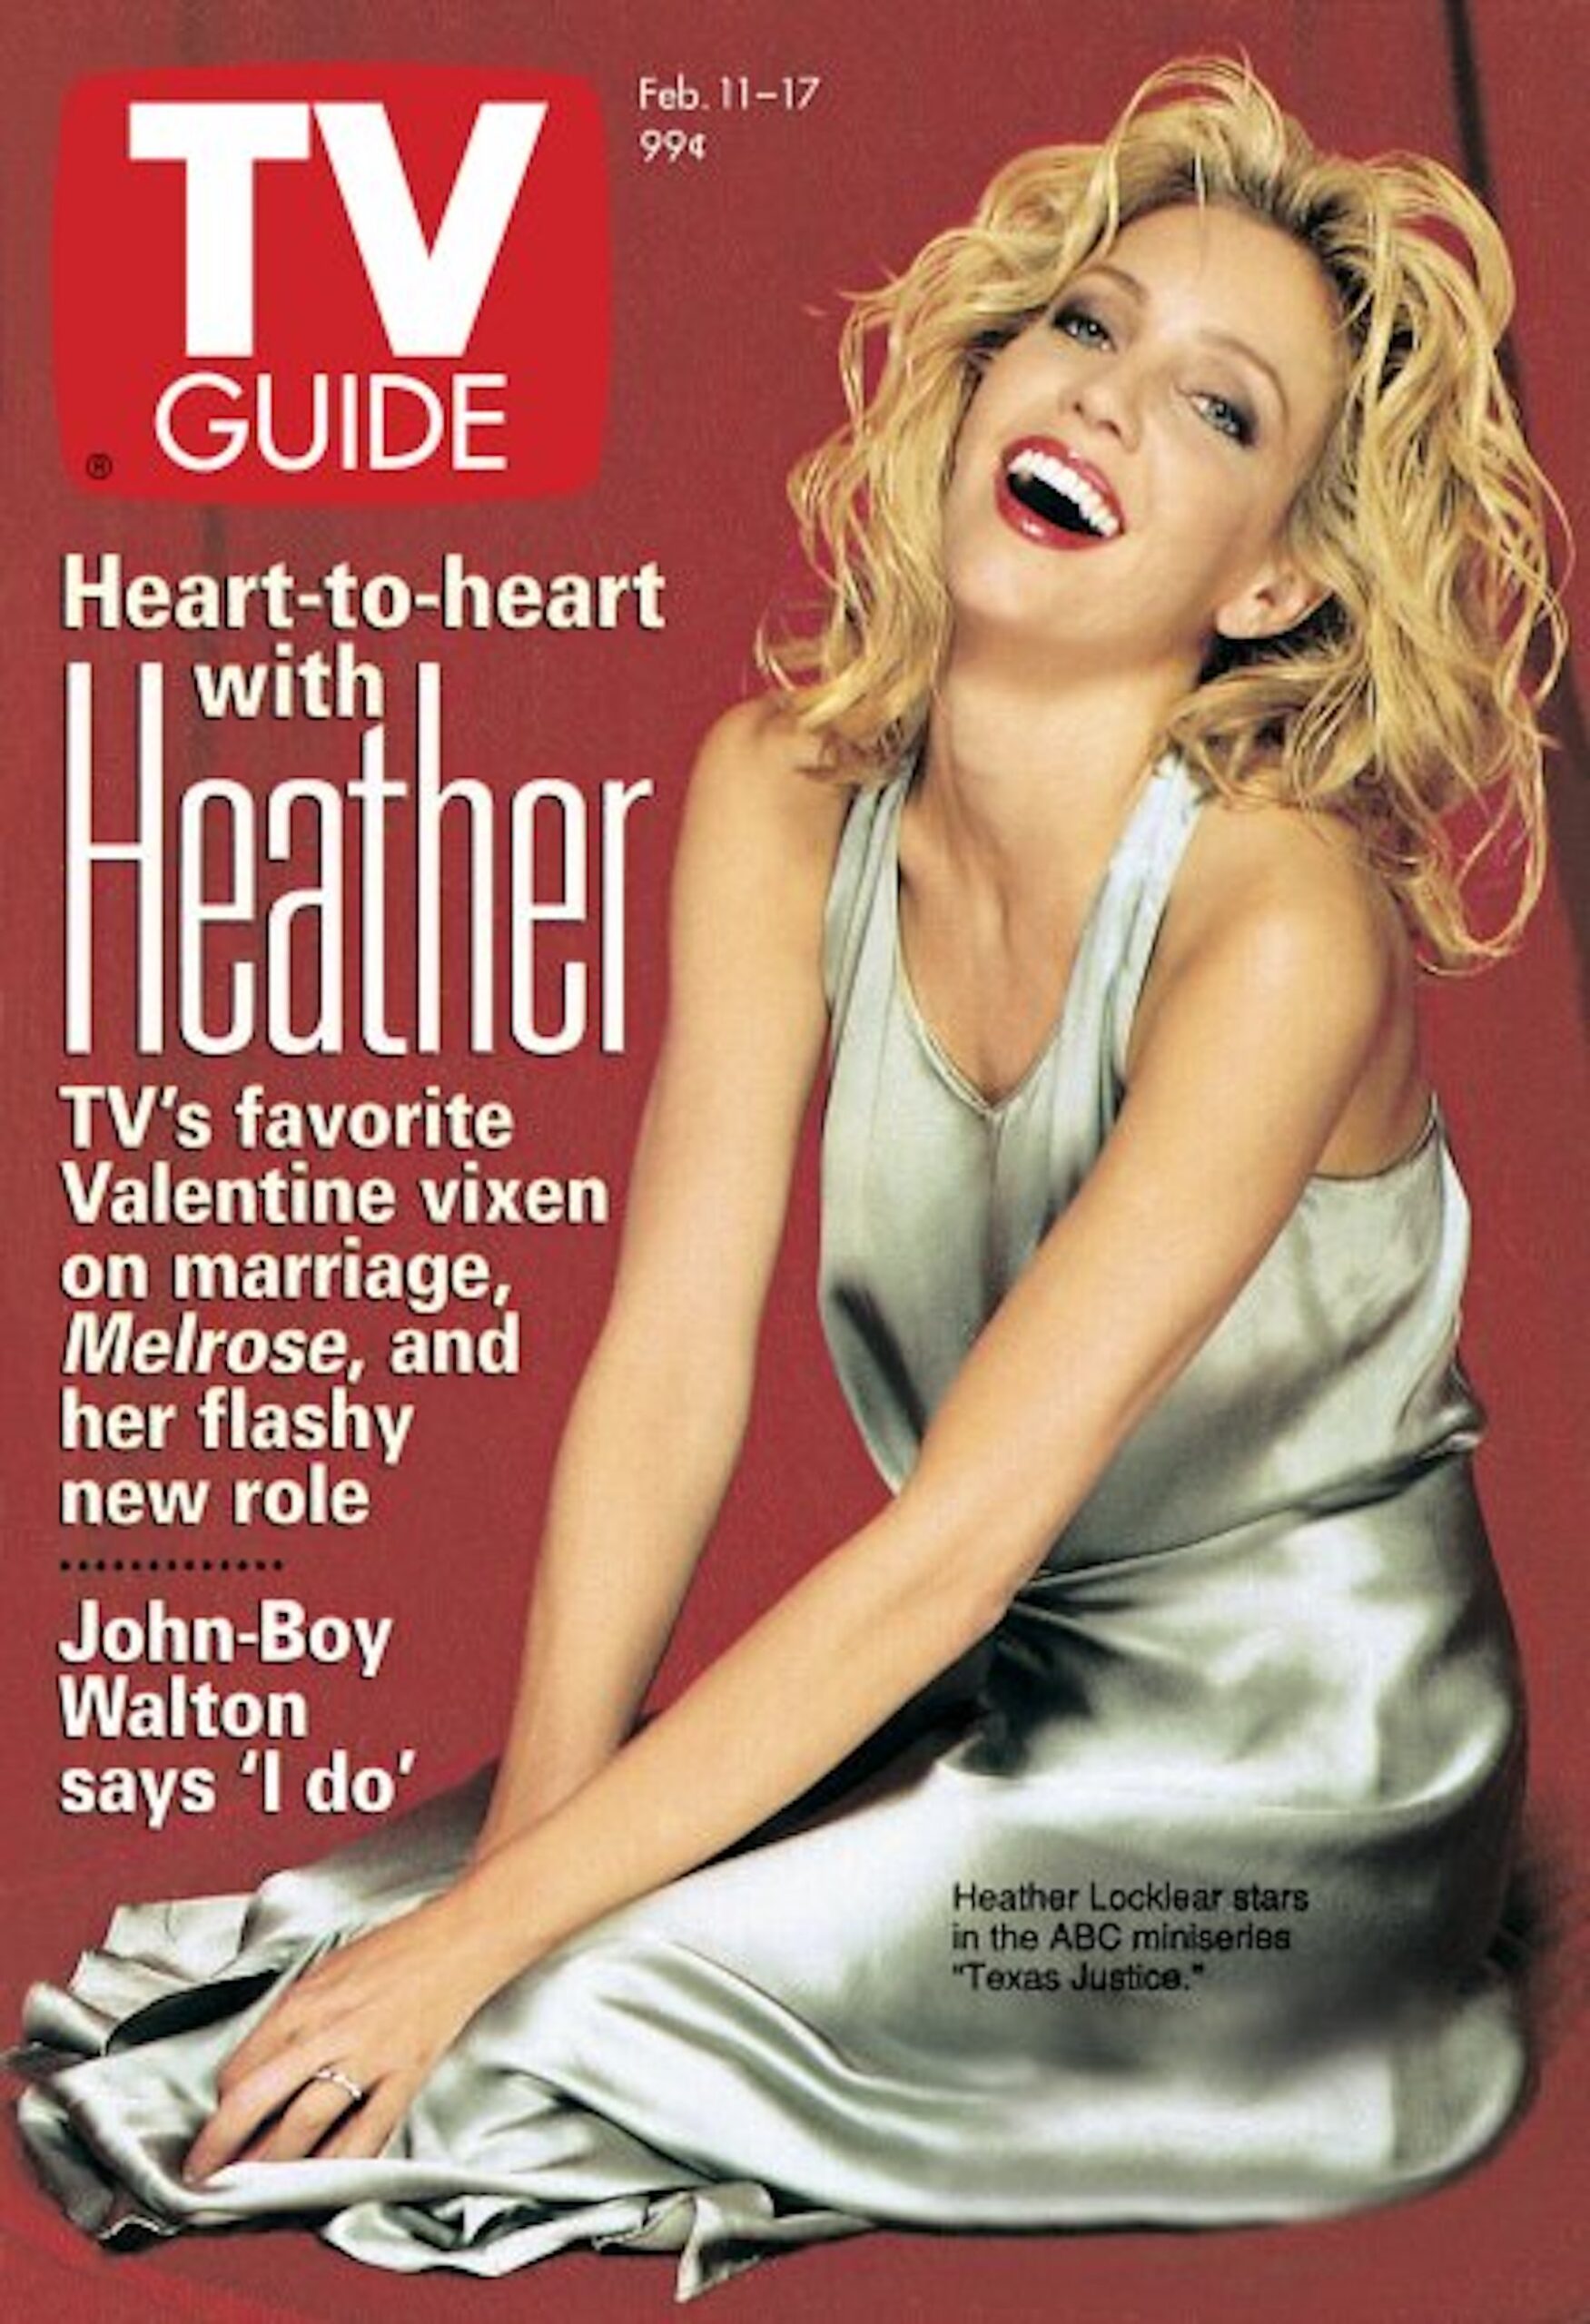 Heather Locklear on the cover of TV Guide Magazine - February 11, 1995